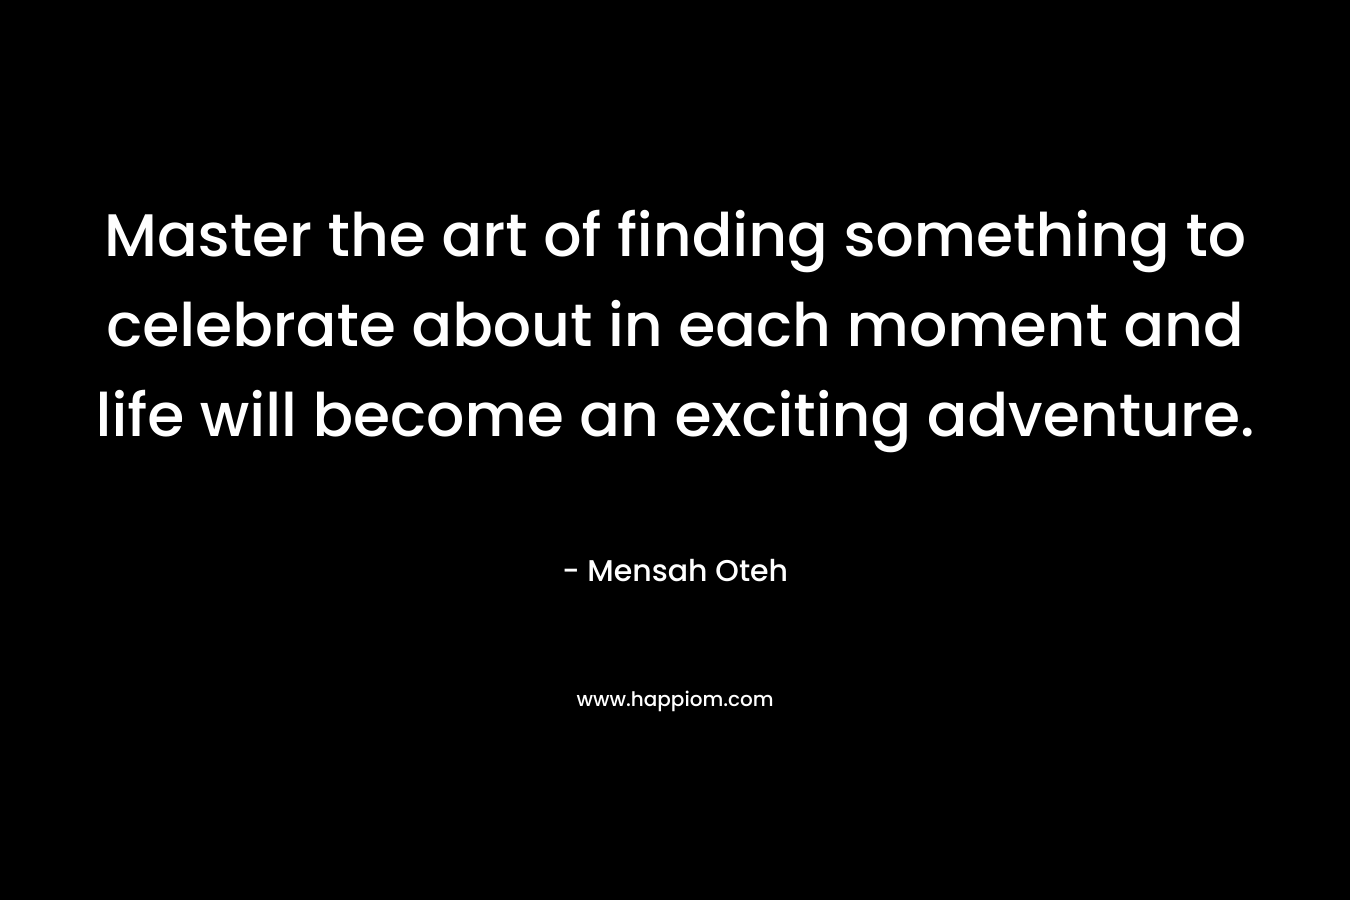 Master the art of finding something to celebrate about in each moment and life will become an exciting adventure.